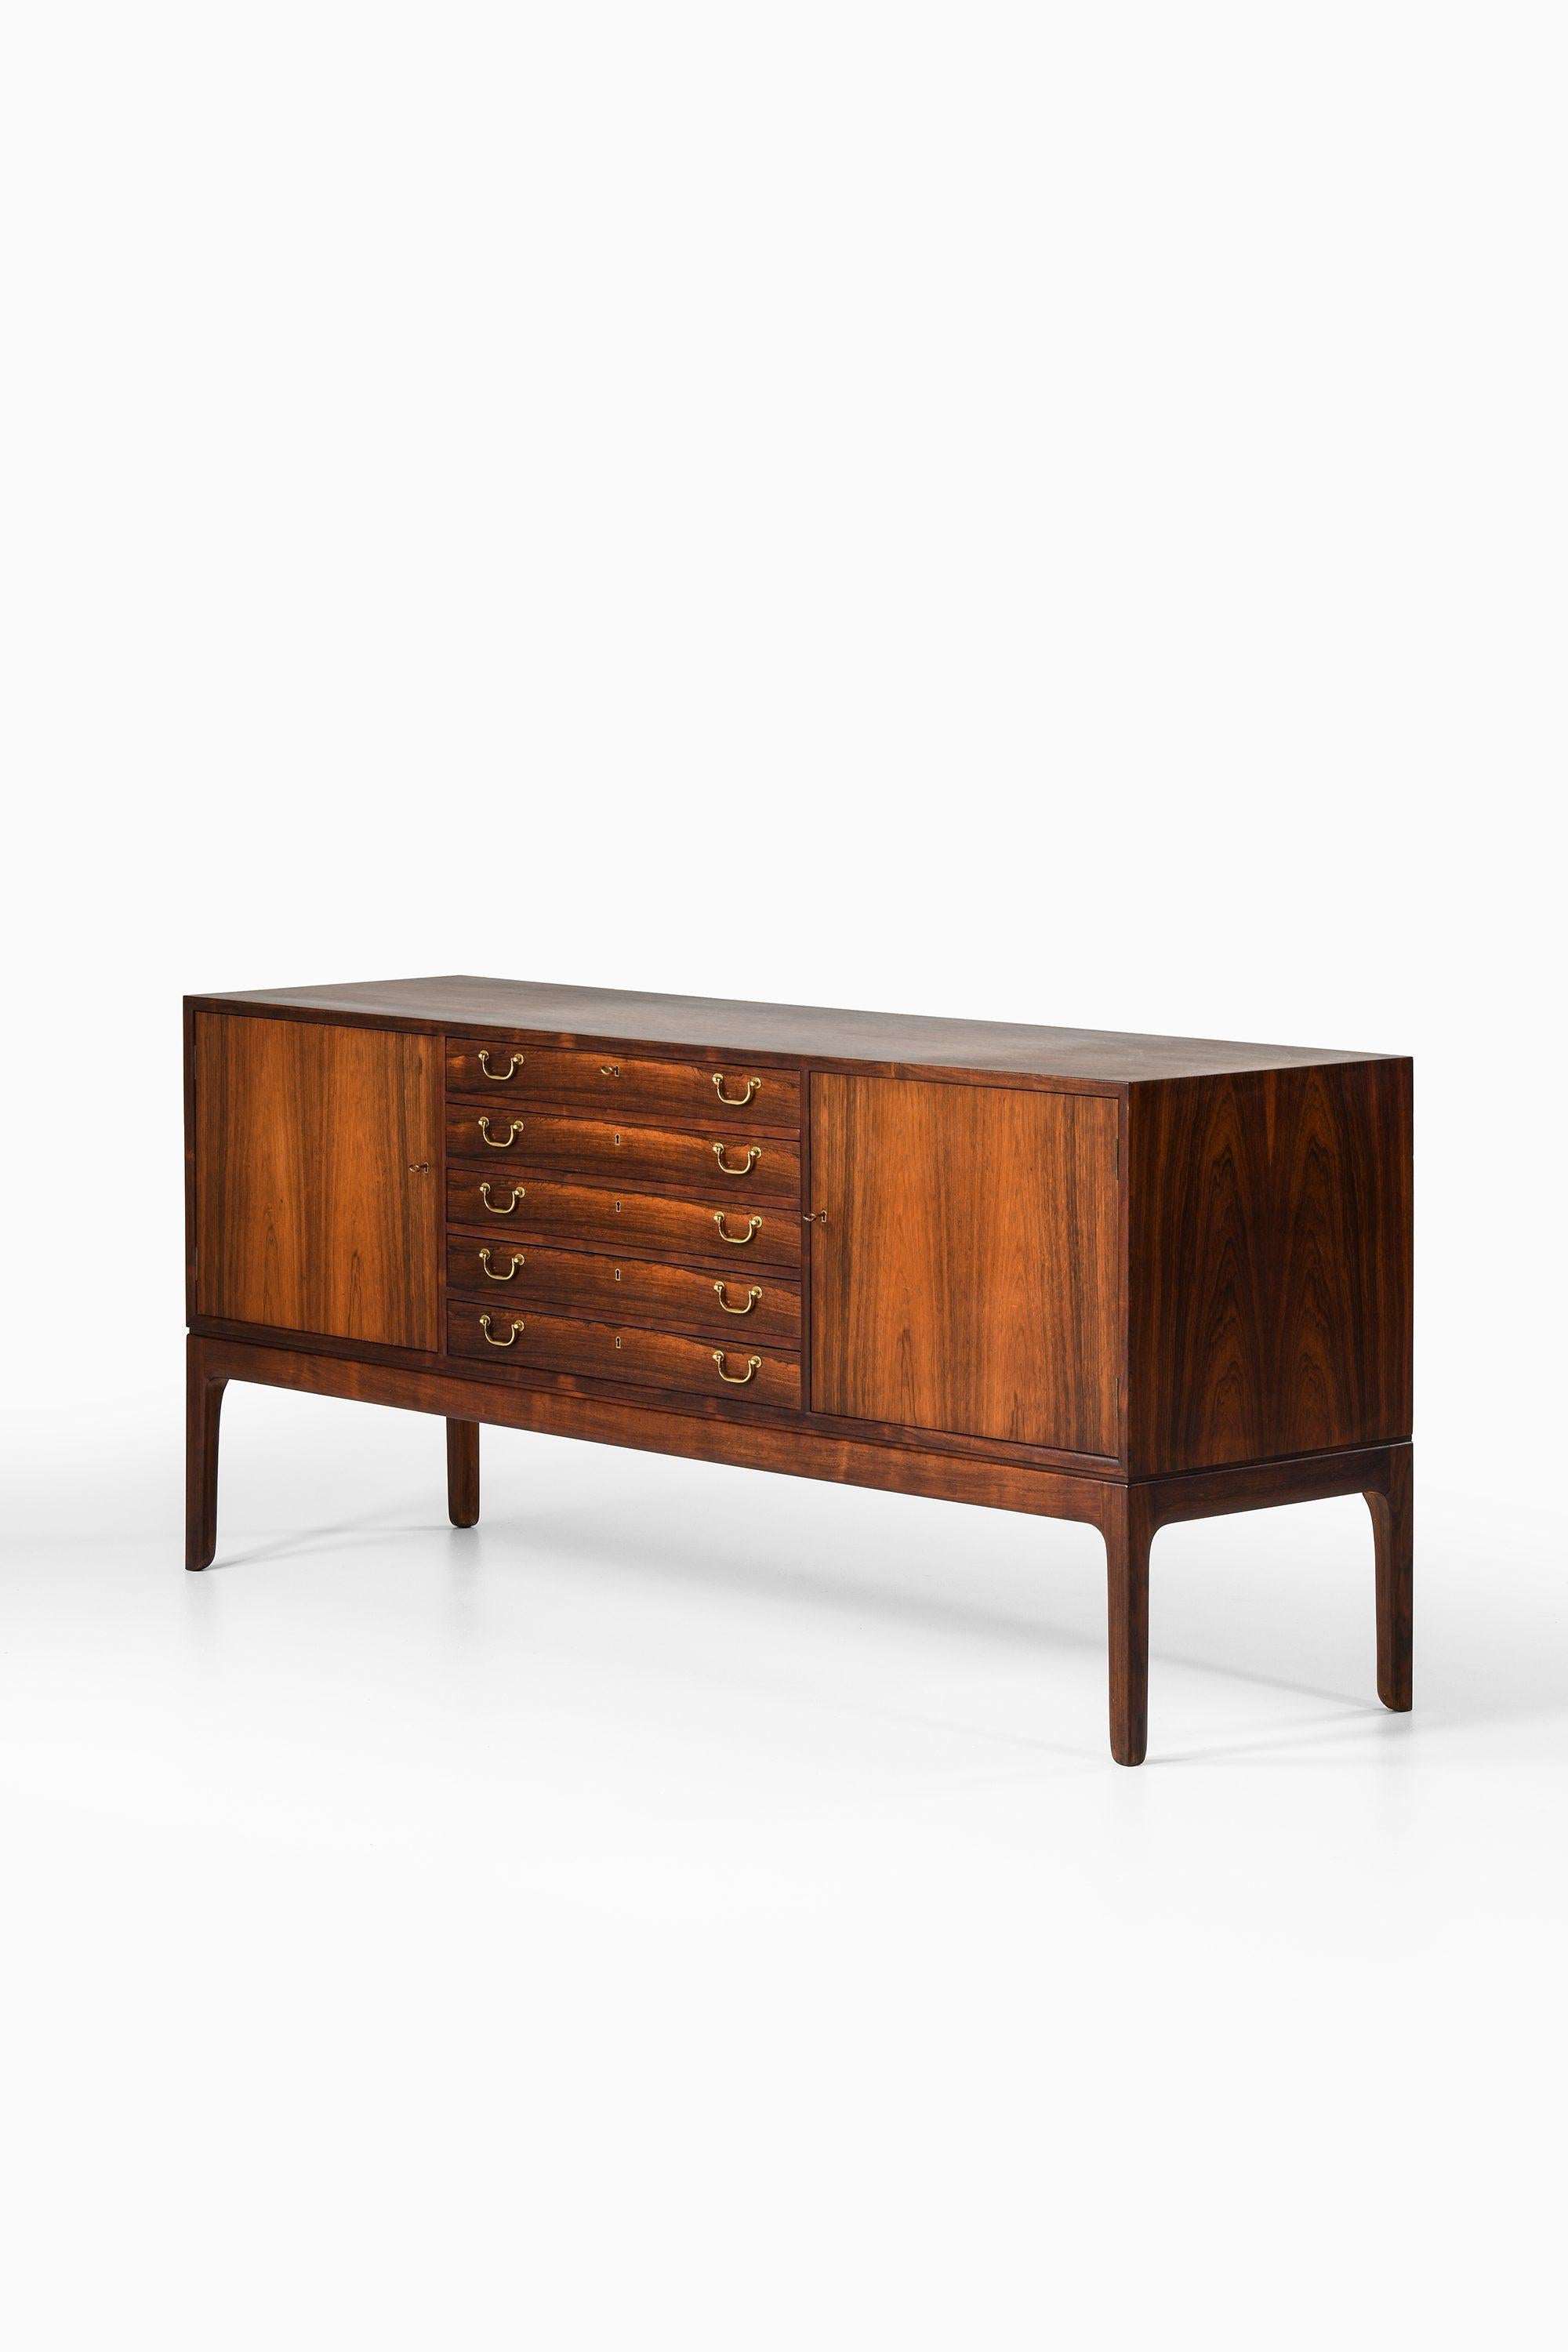 Sideboard in Rosewood and brass by Ole Wanscher

Additional Information:
Material: Rosewood, brass
Style: Mid century, Scandinavian
Produced by cabinetmaker A.J. Iversen in Denmark
Dimensions (W x D x H): 196 x 54 x 86 cm
Condition: Good vintage